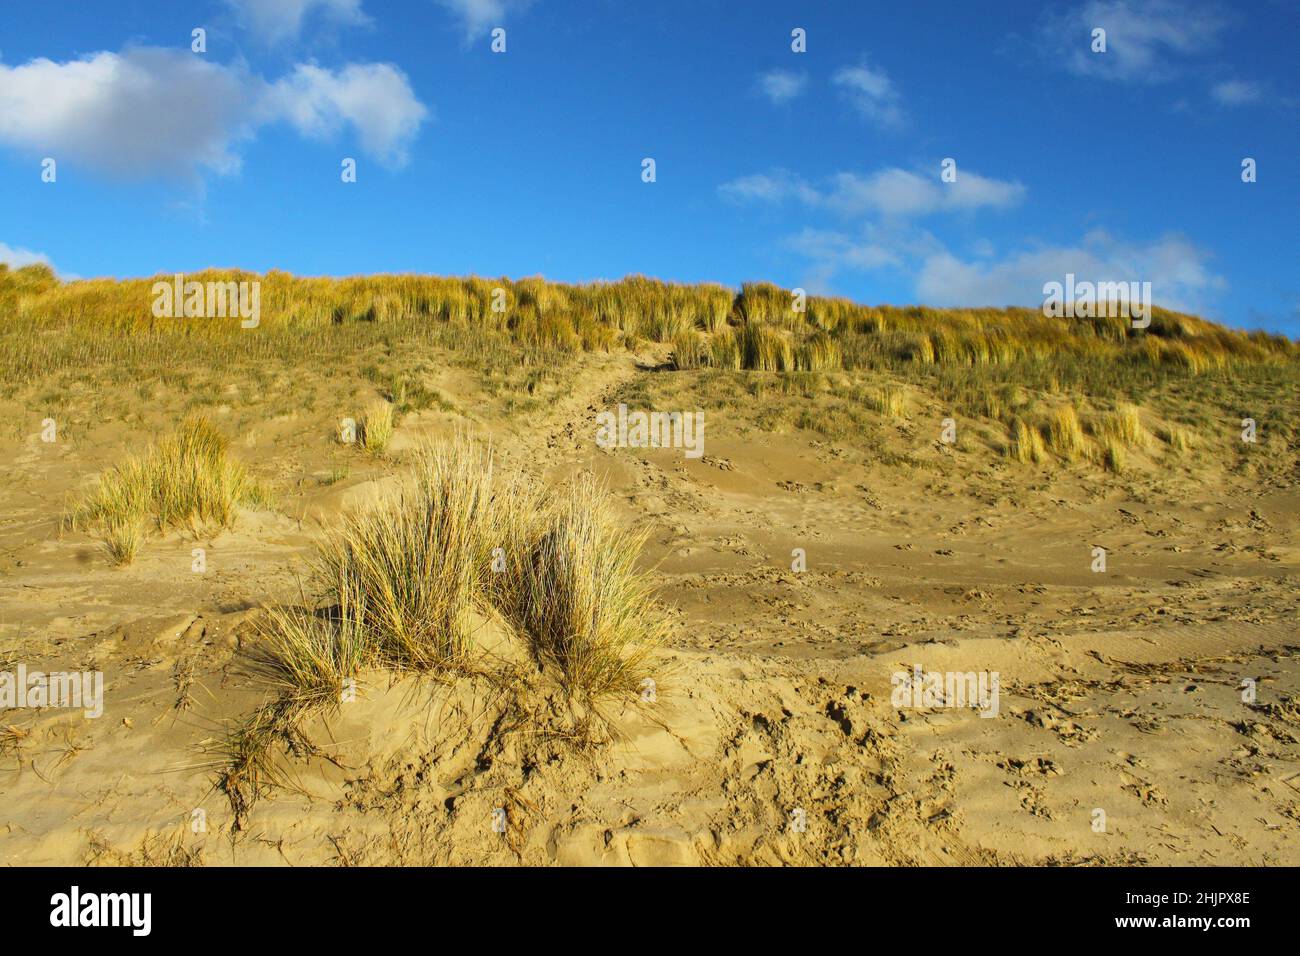 The marram grass (ammophila arenaria) on the coast of the Netherlands Stock Photo